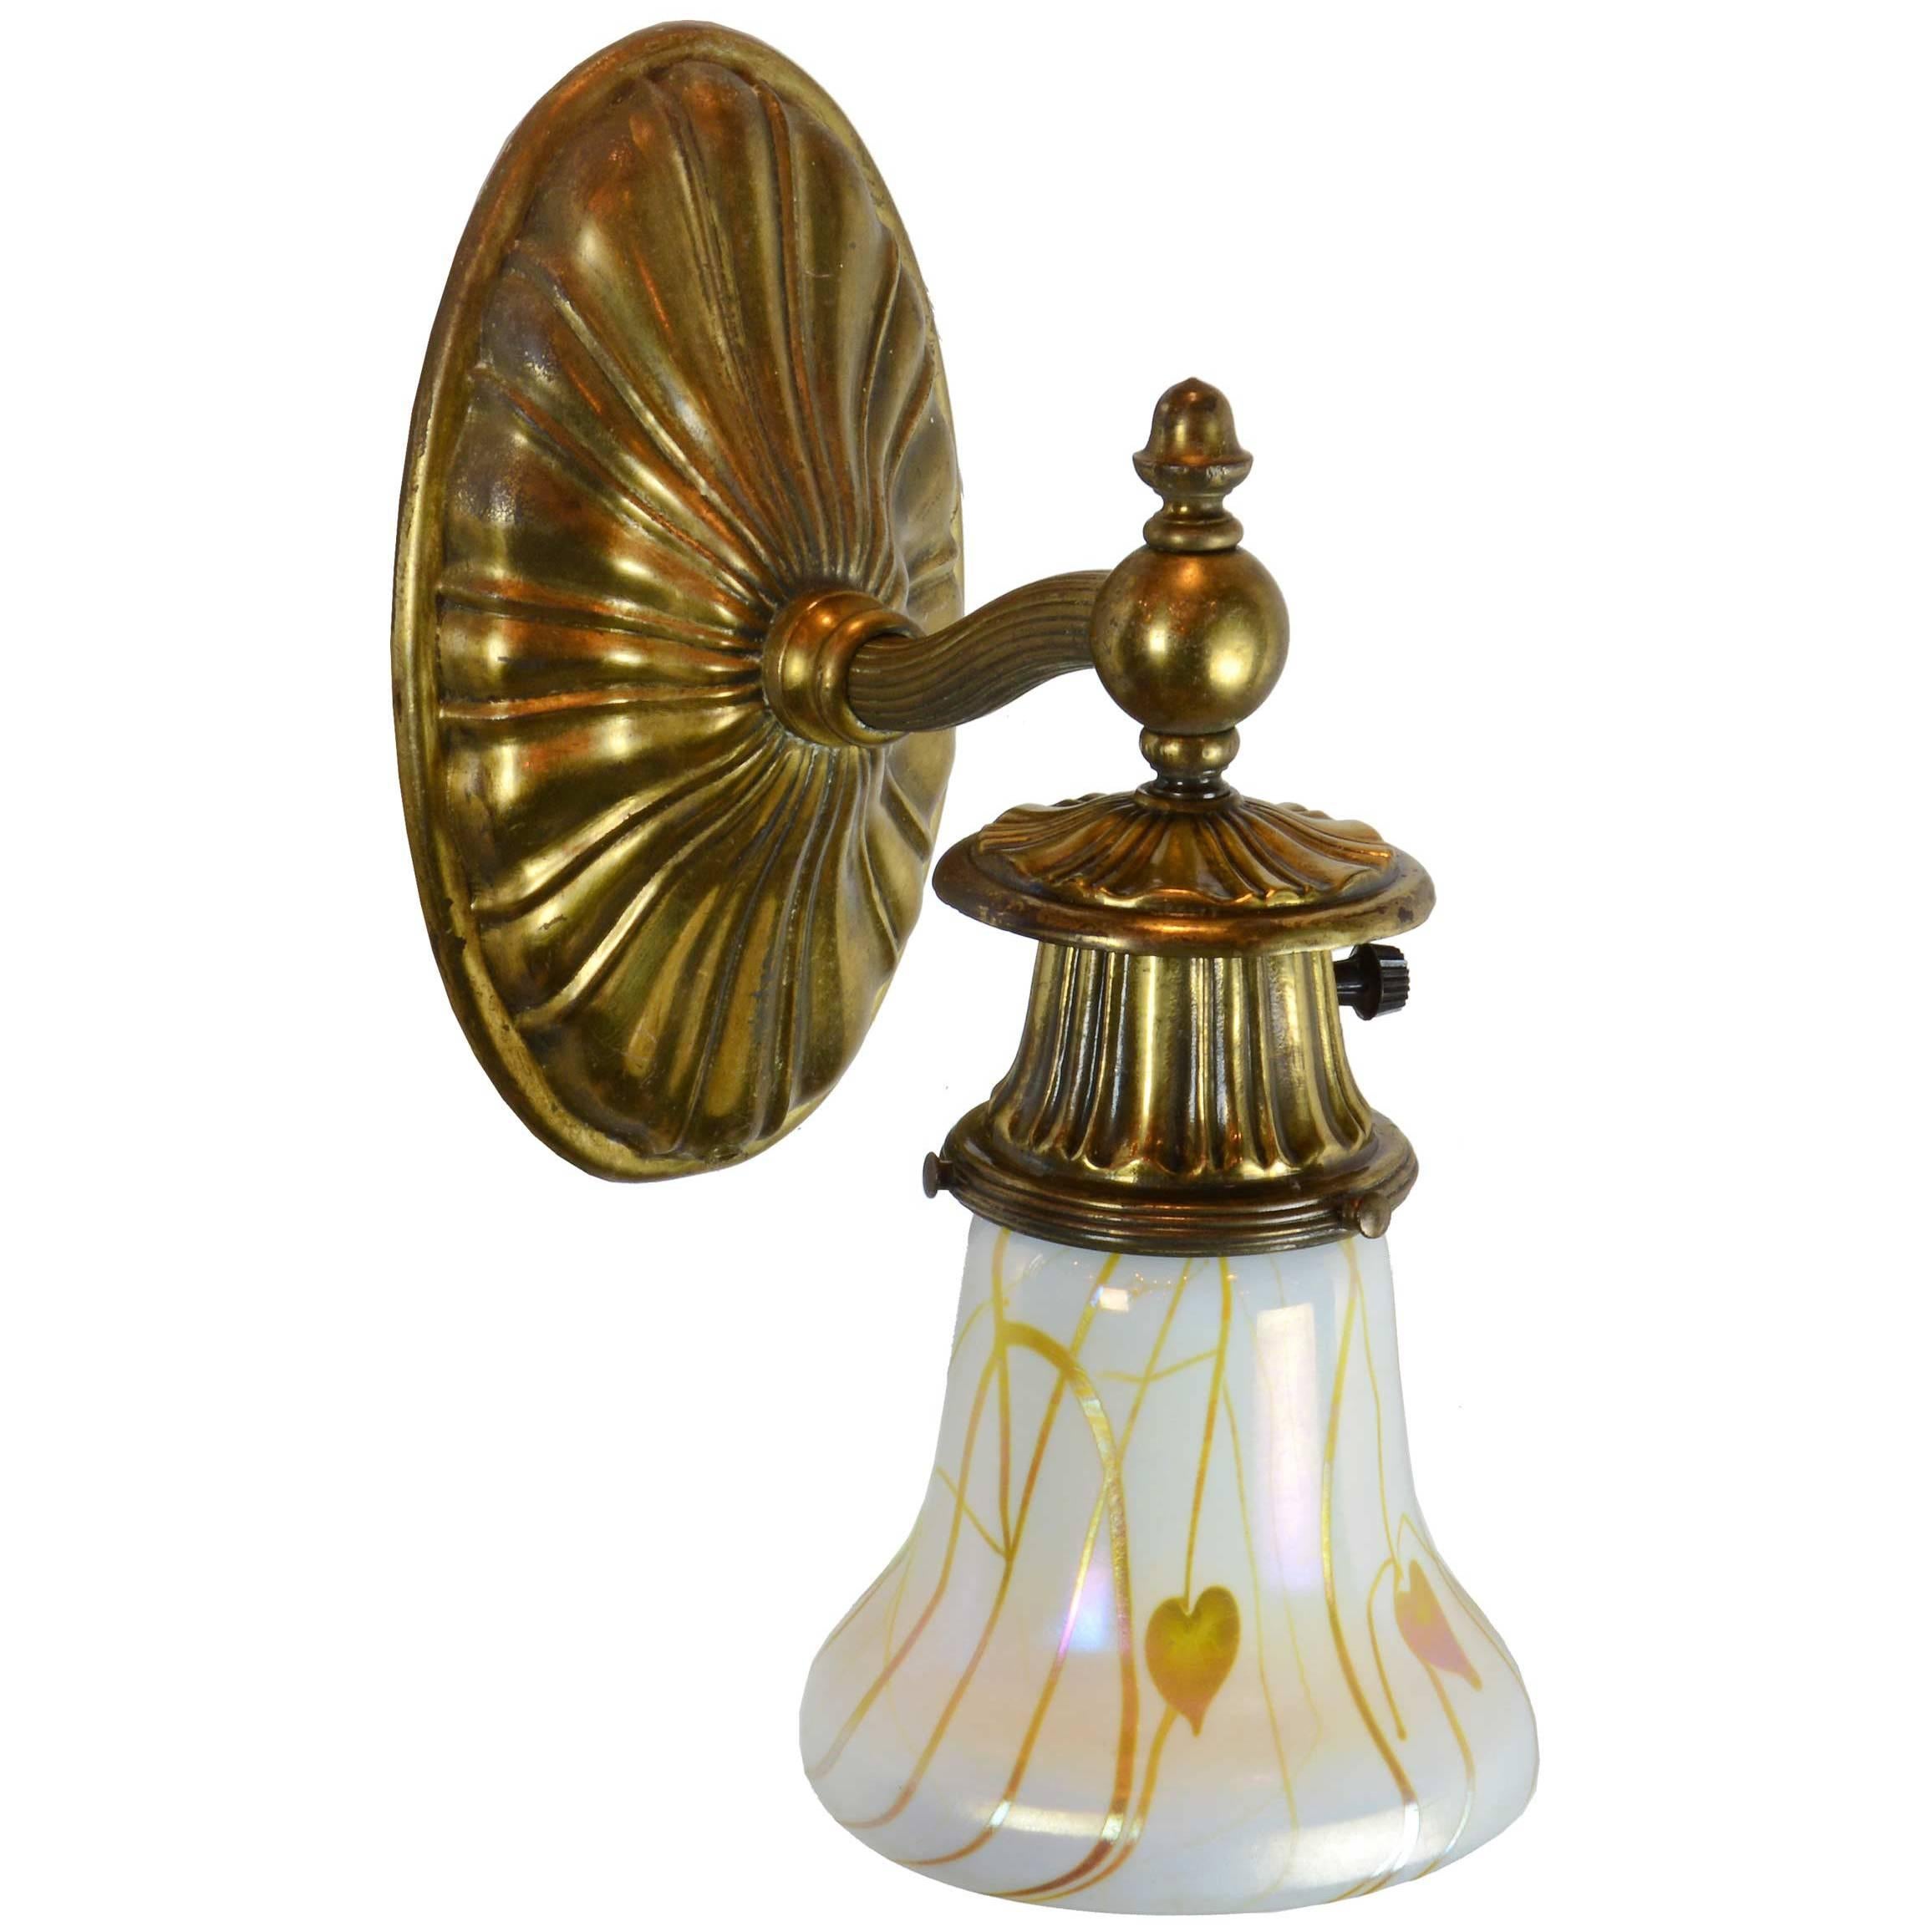 Brass Sheffield Sconce with Shade, circa 1915